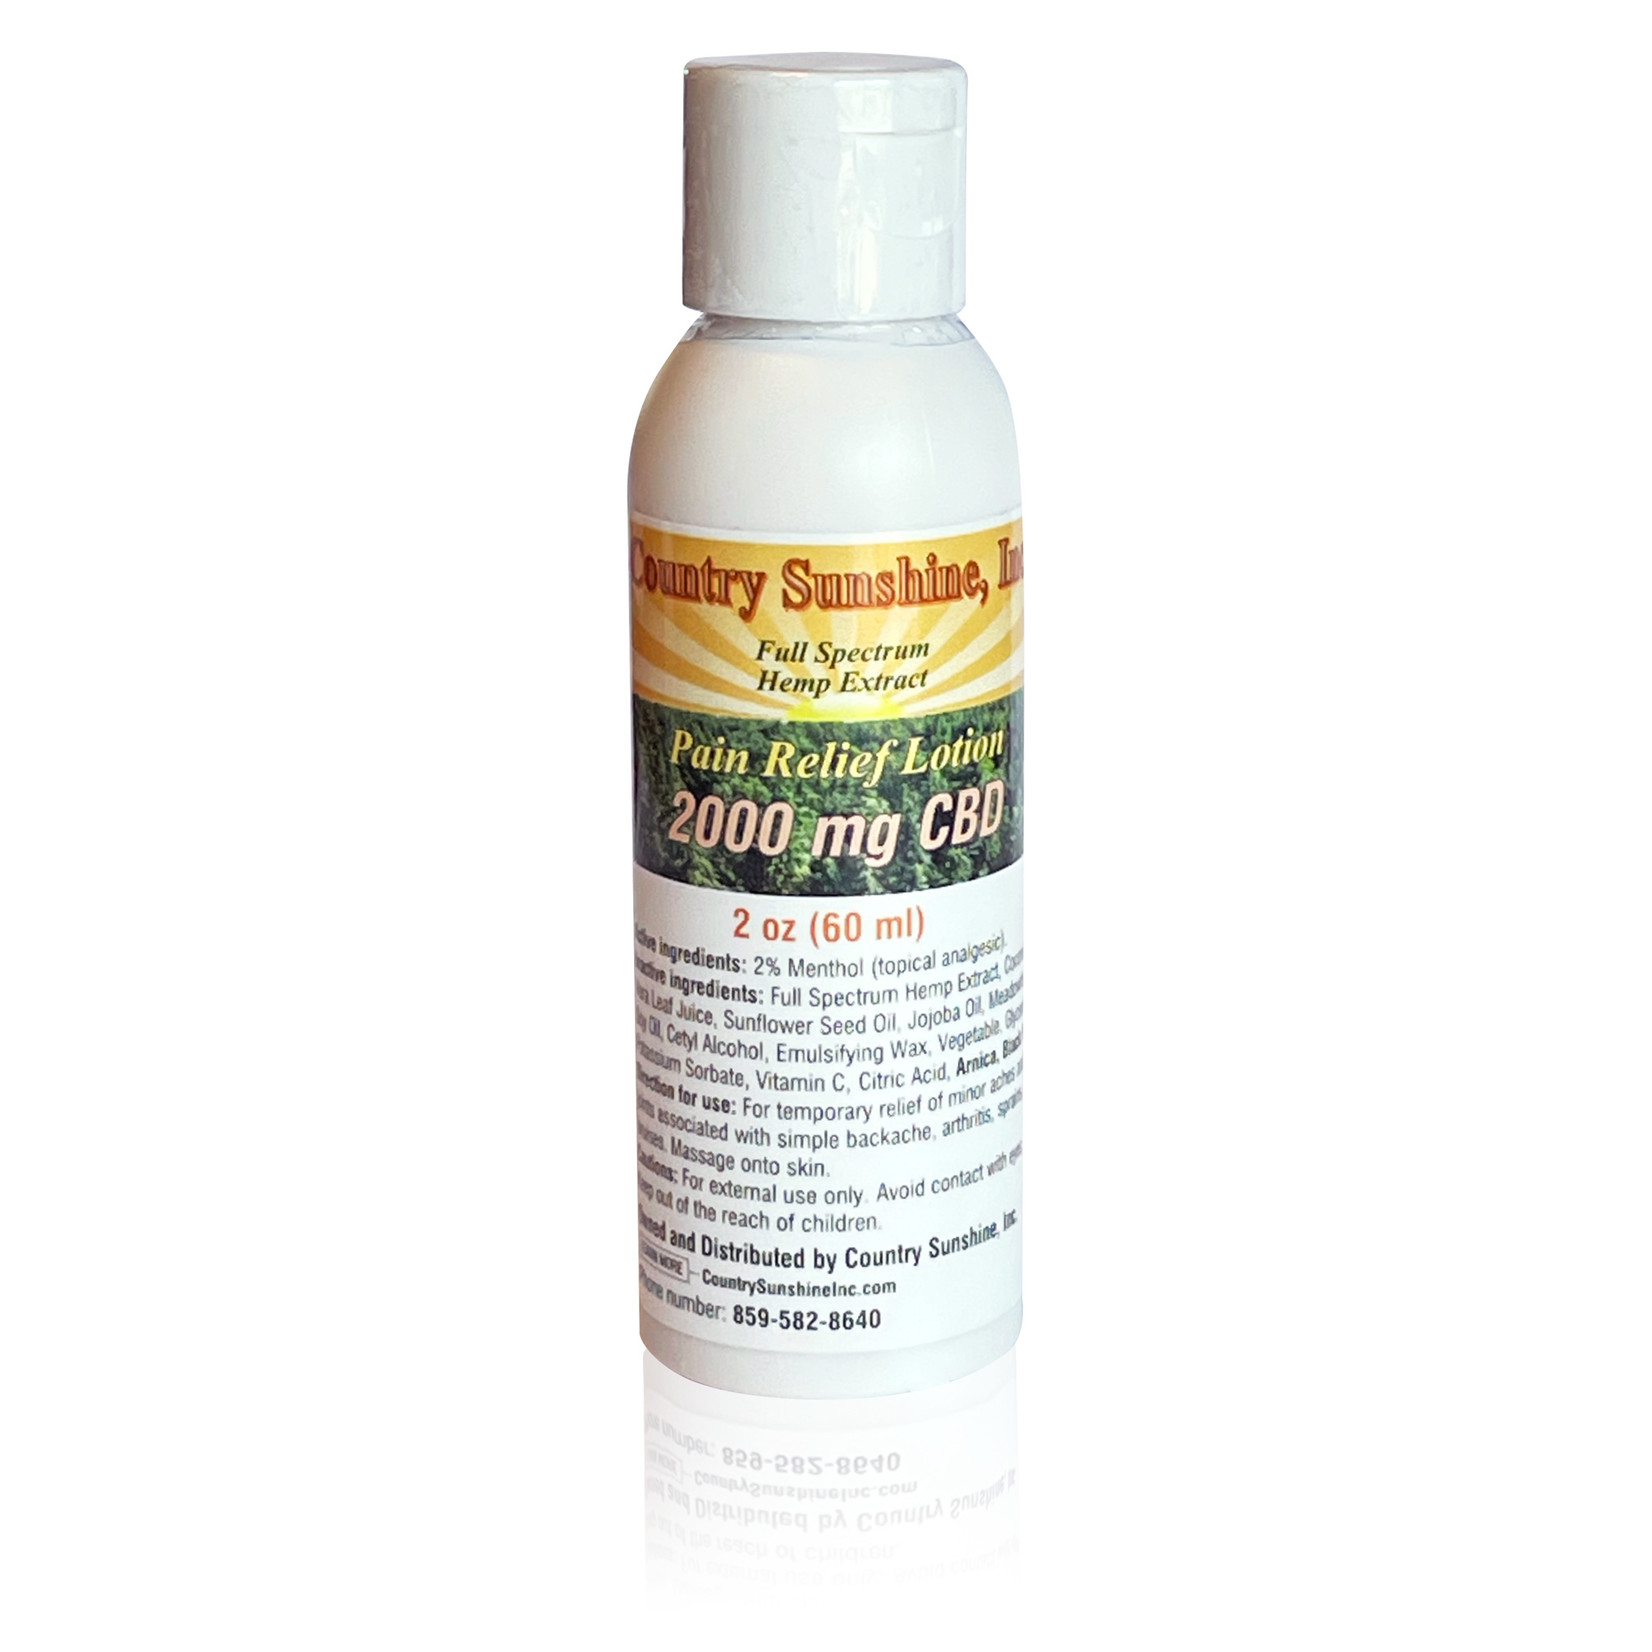 Country Sunshine Country Sunshine, Inc. Soothing Pain Relief Lotion